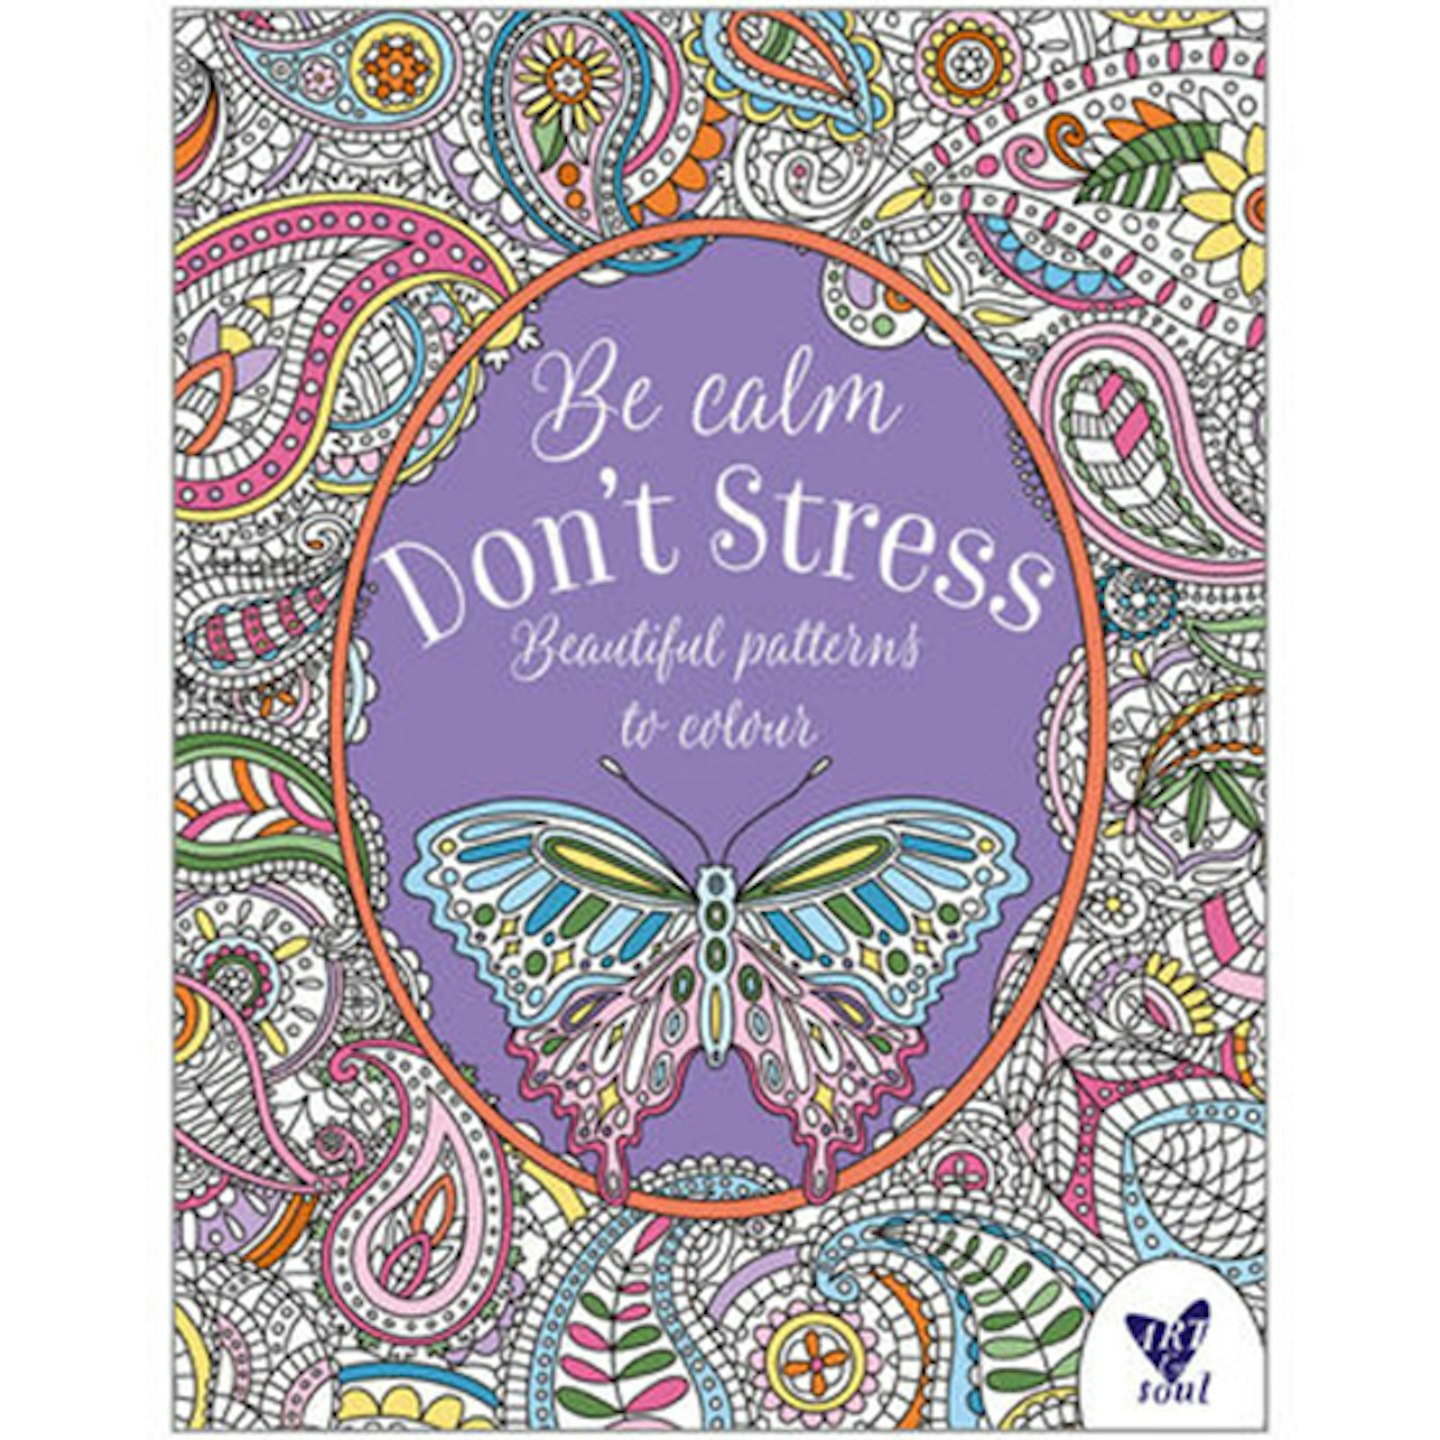 Don't stress be calm book